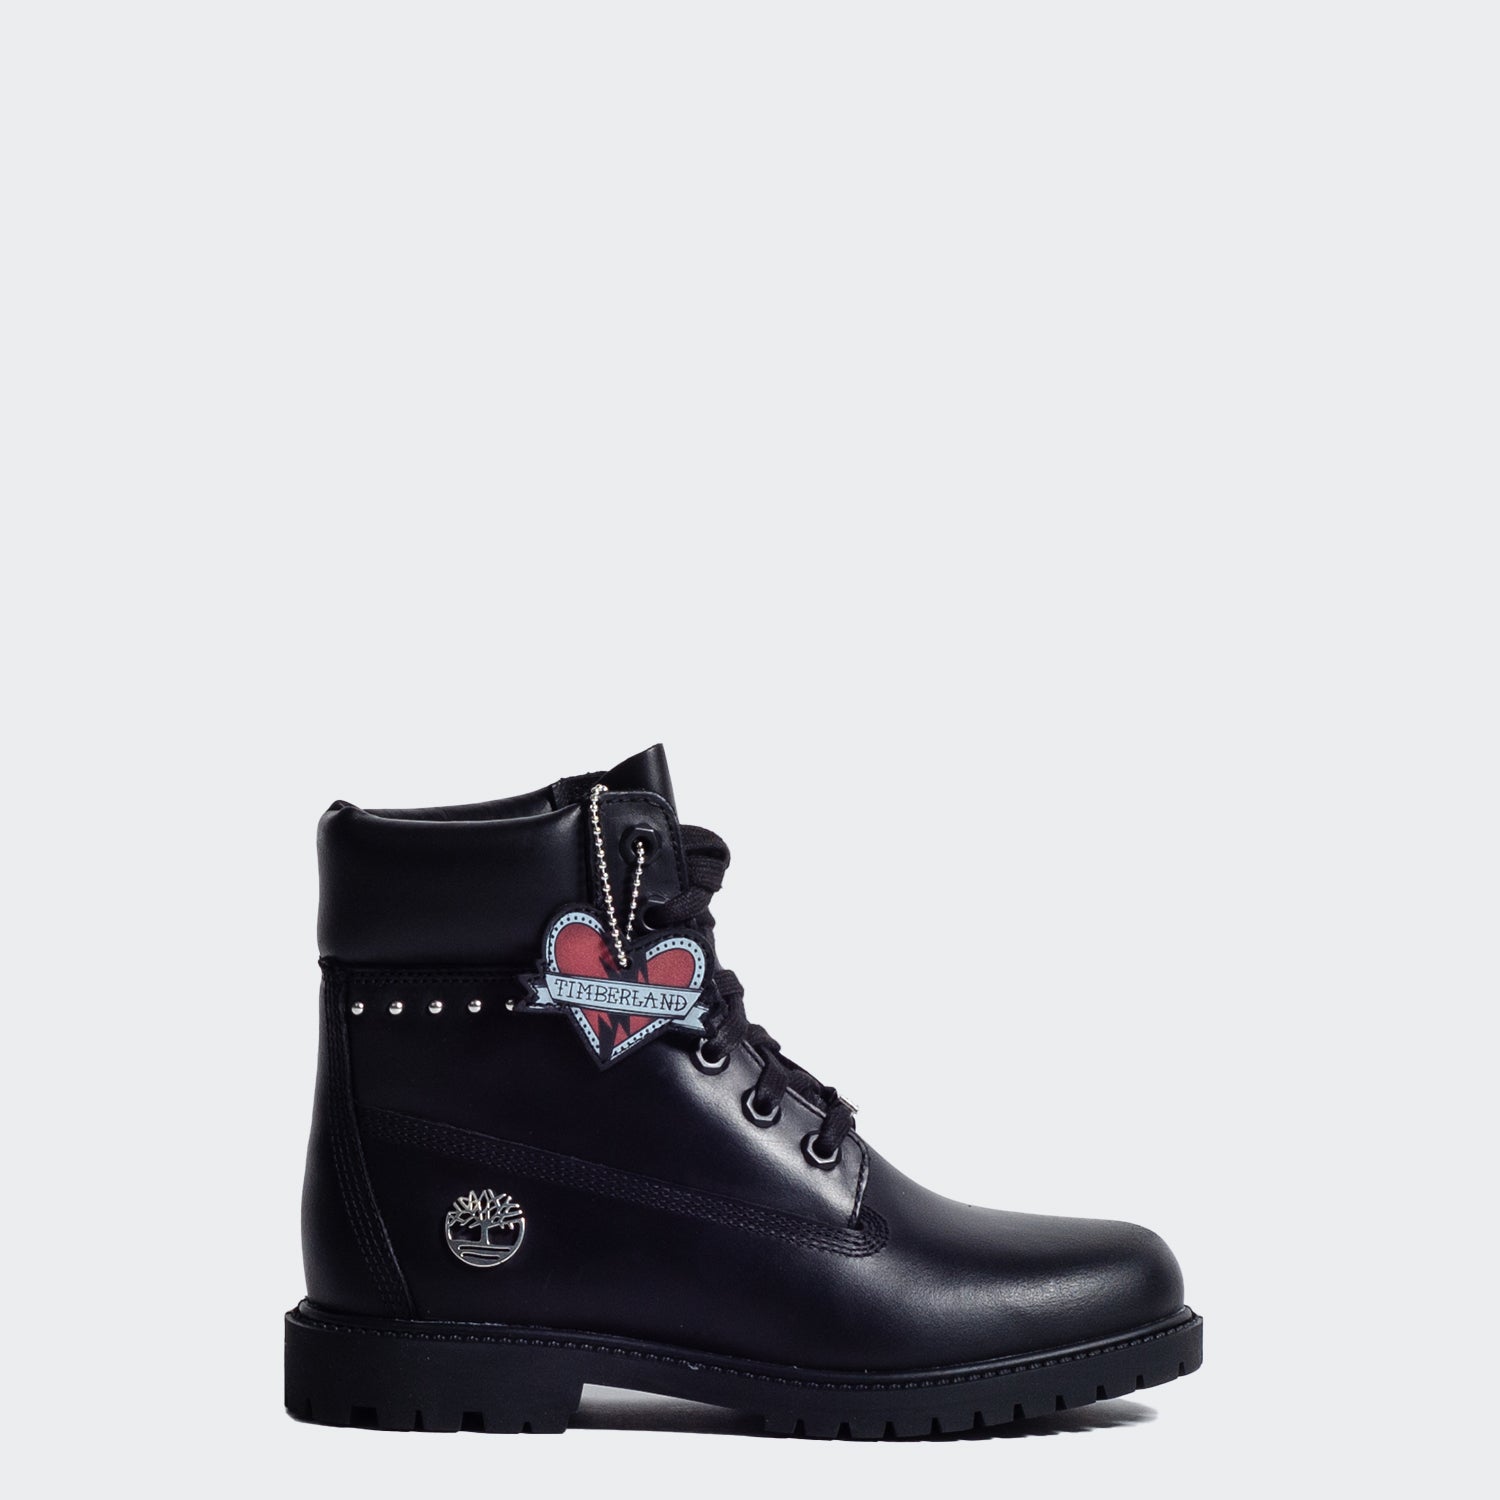 6-Inch Waterproof Boots Chicago City Sports